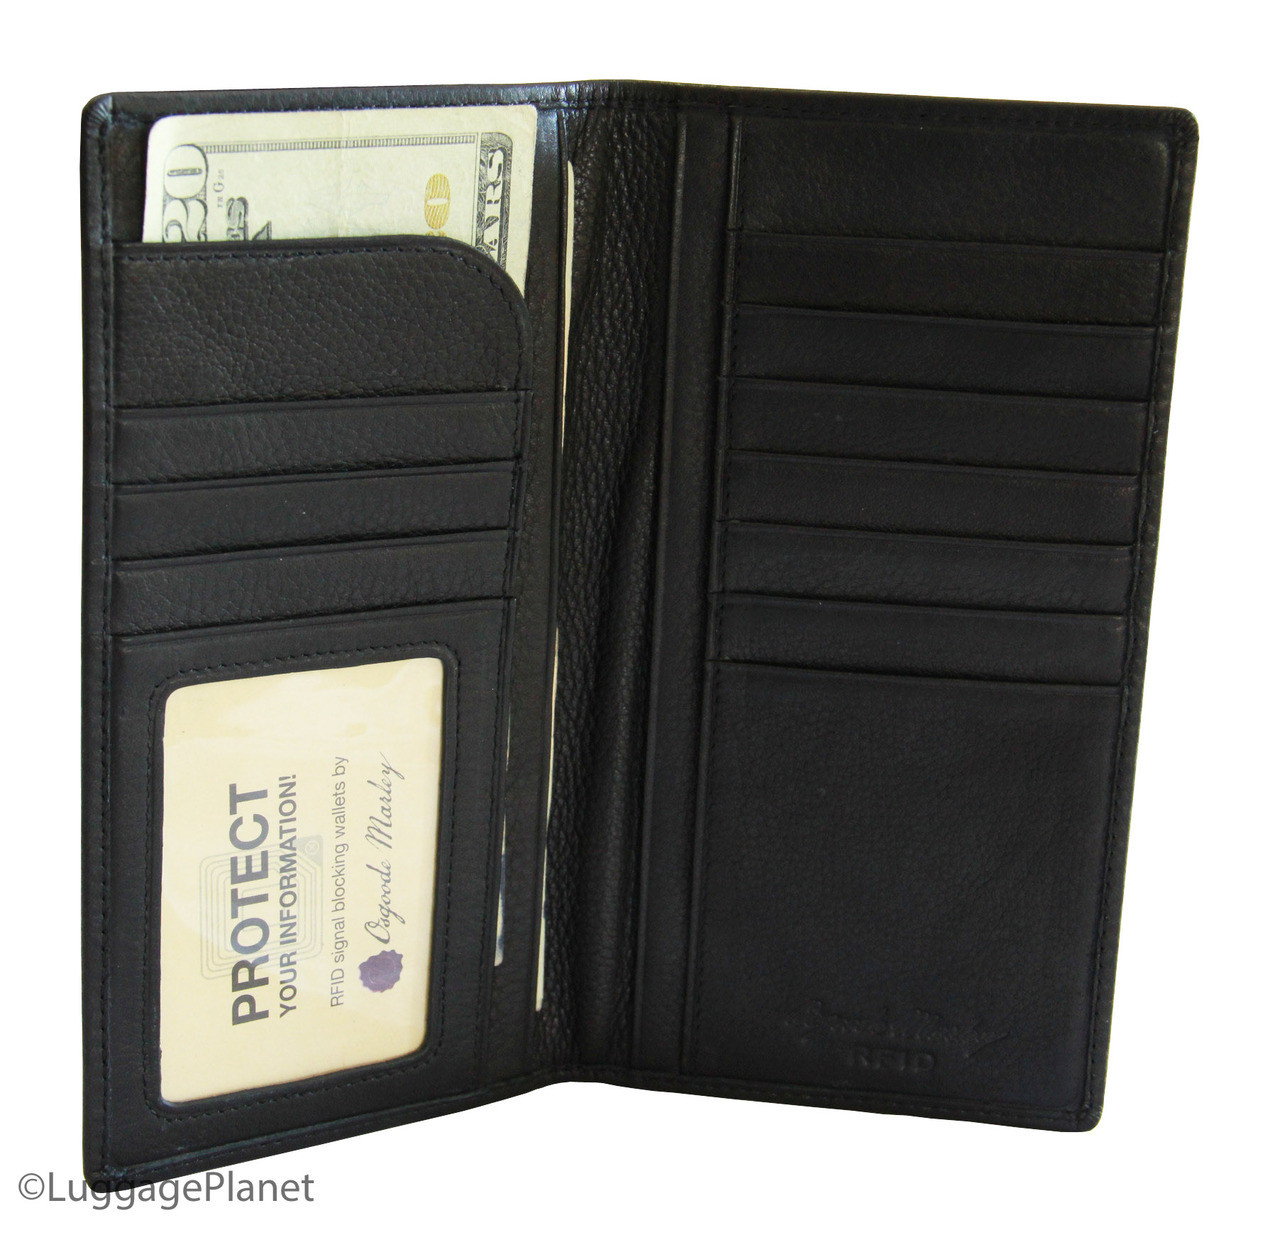 Jack Georges Patent Collection Tri-Fold Black